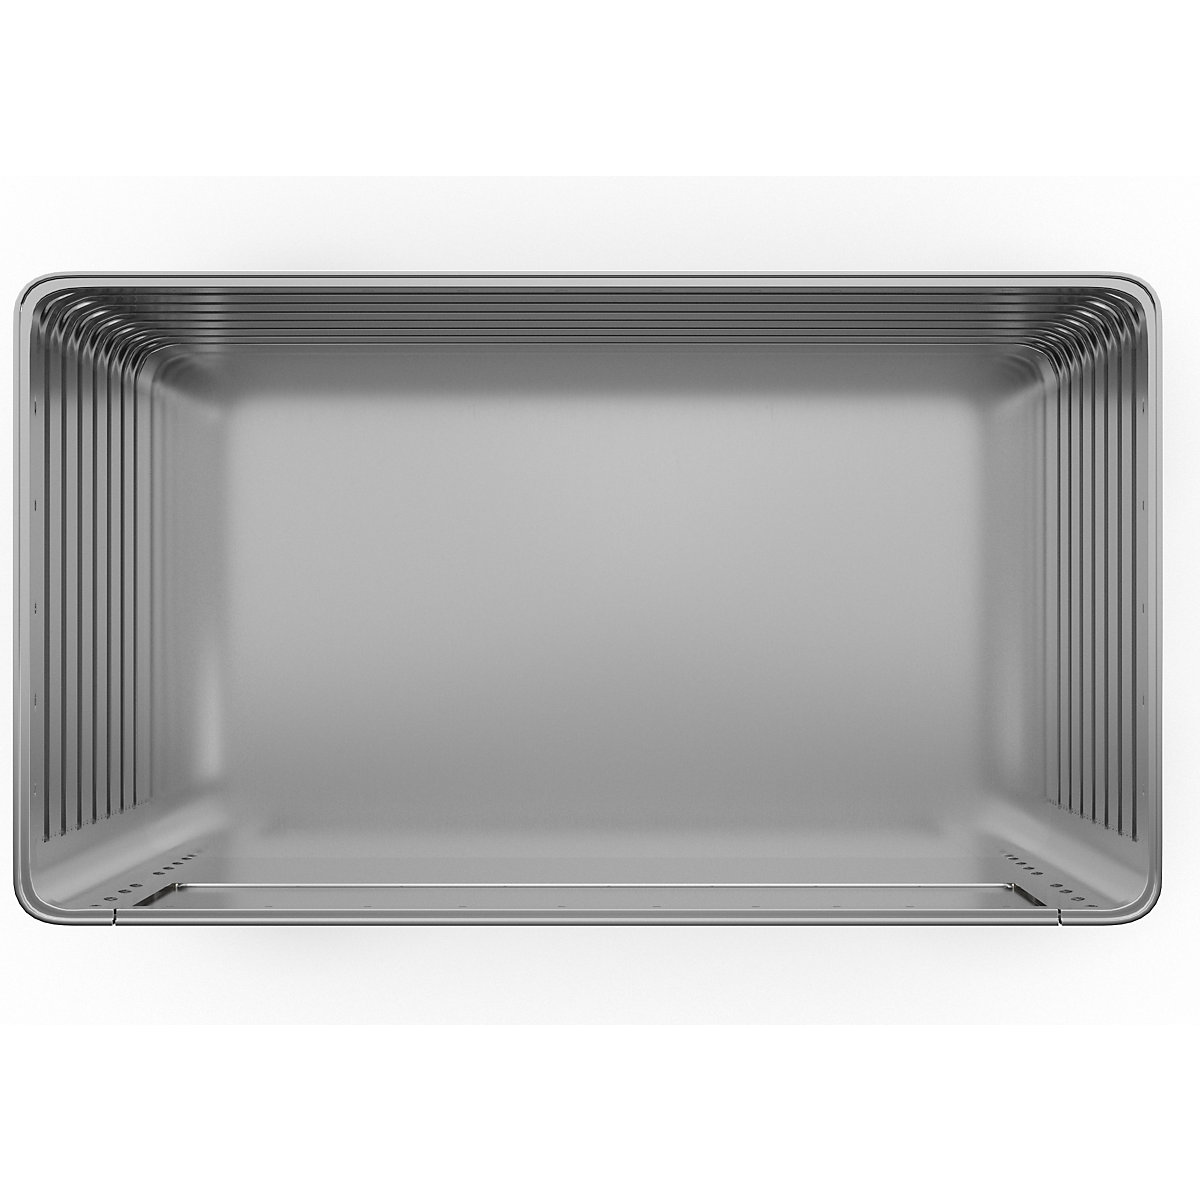 Aluminium container truck, fold down side panel – Gmöhling (Product illustration 10)-9